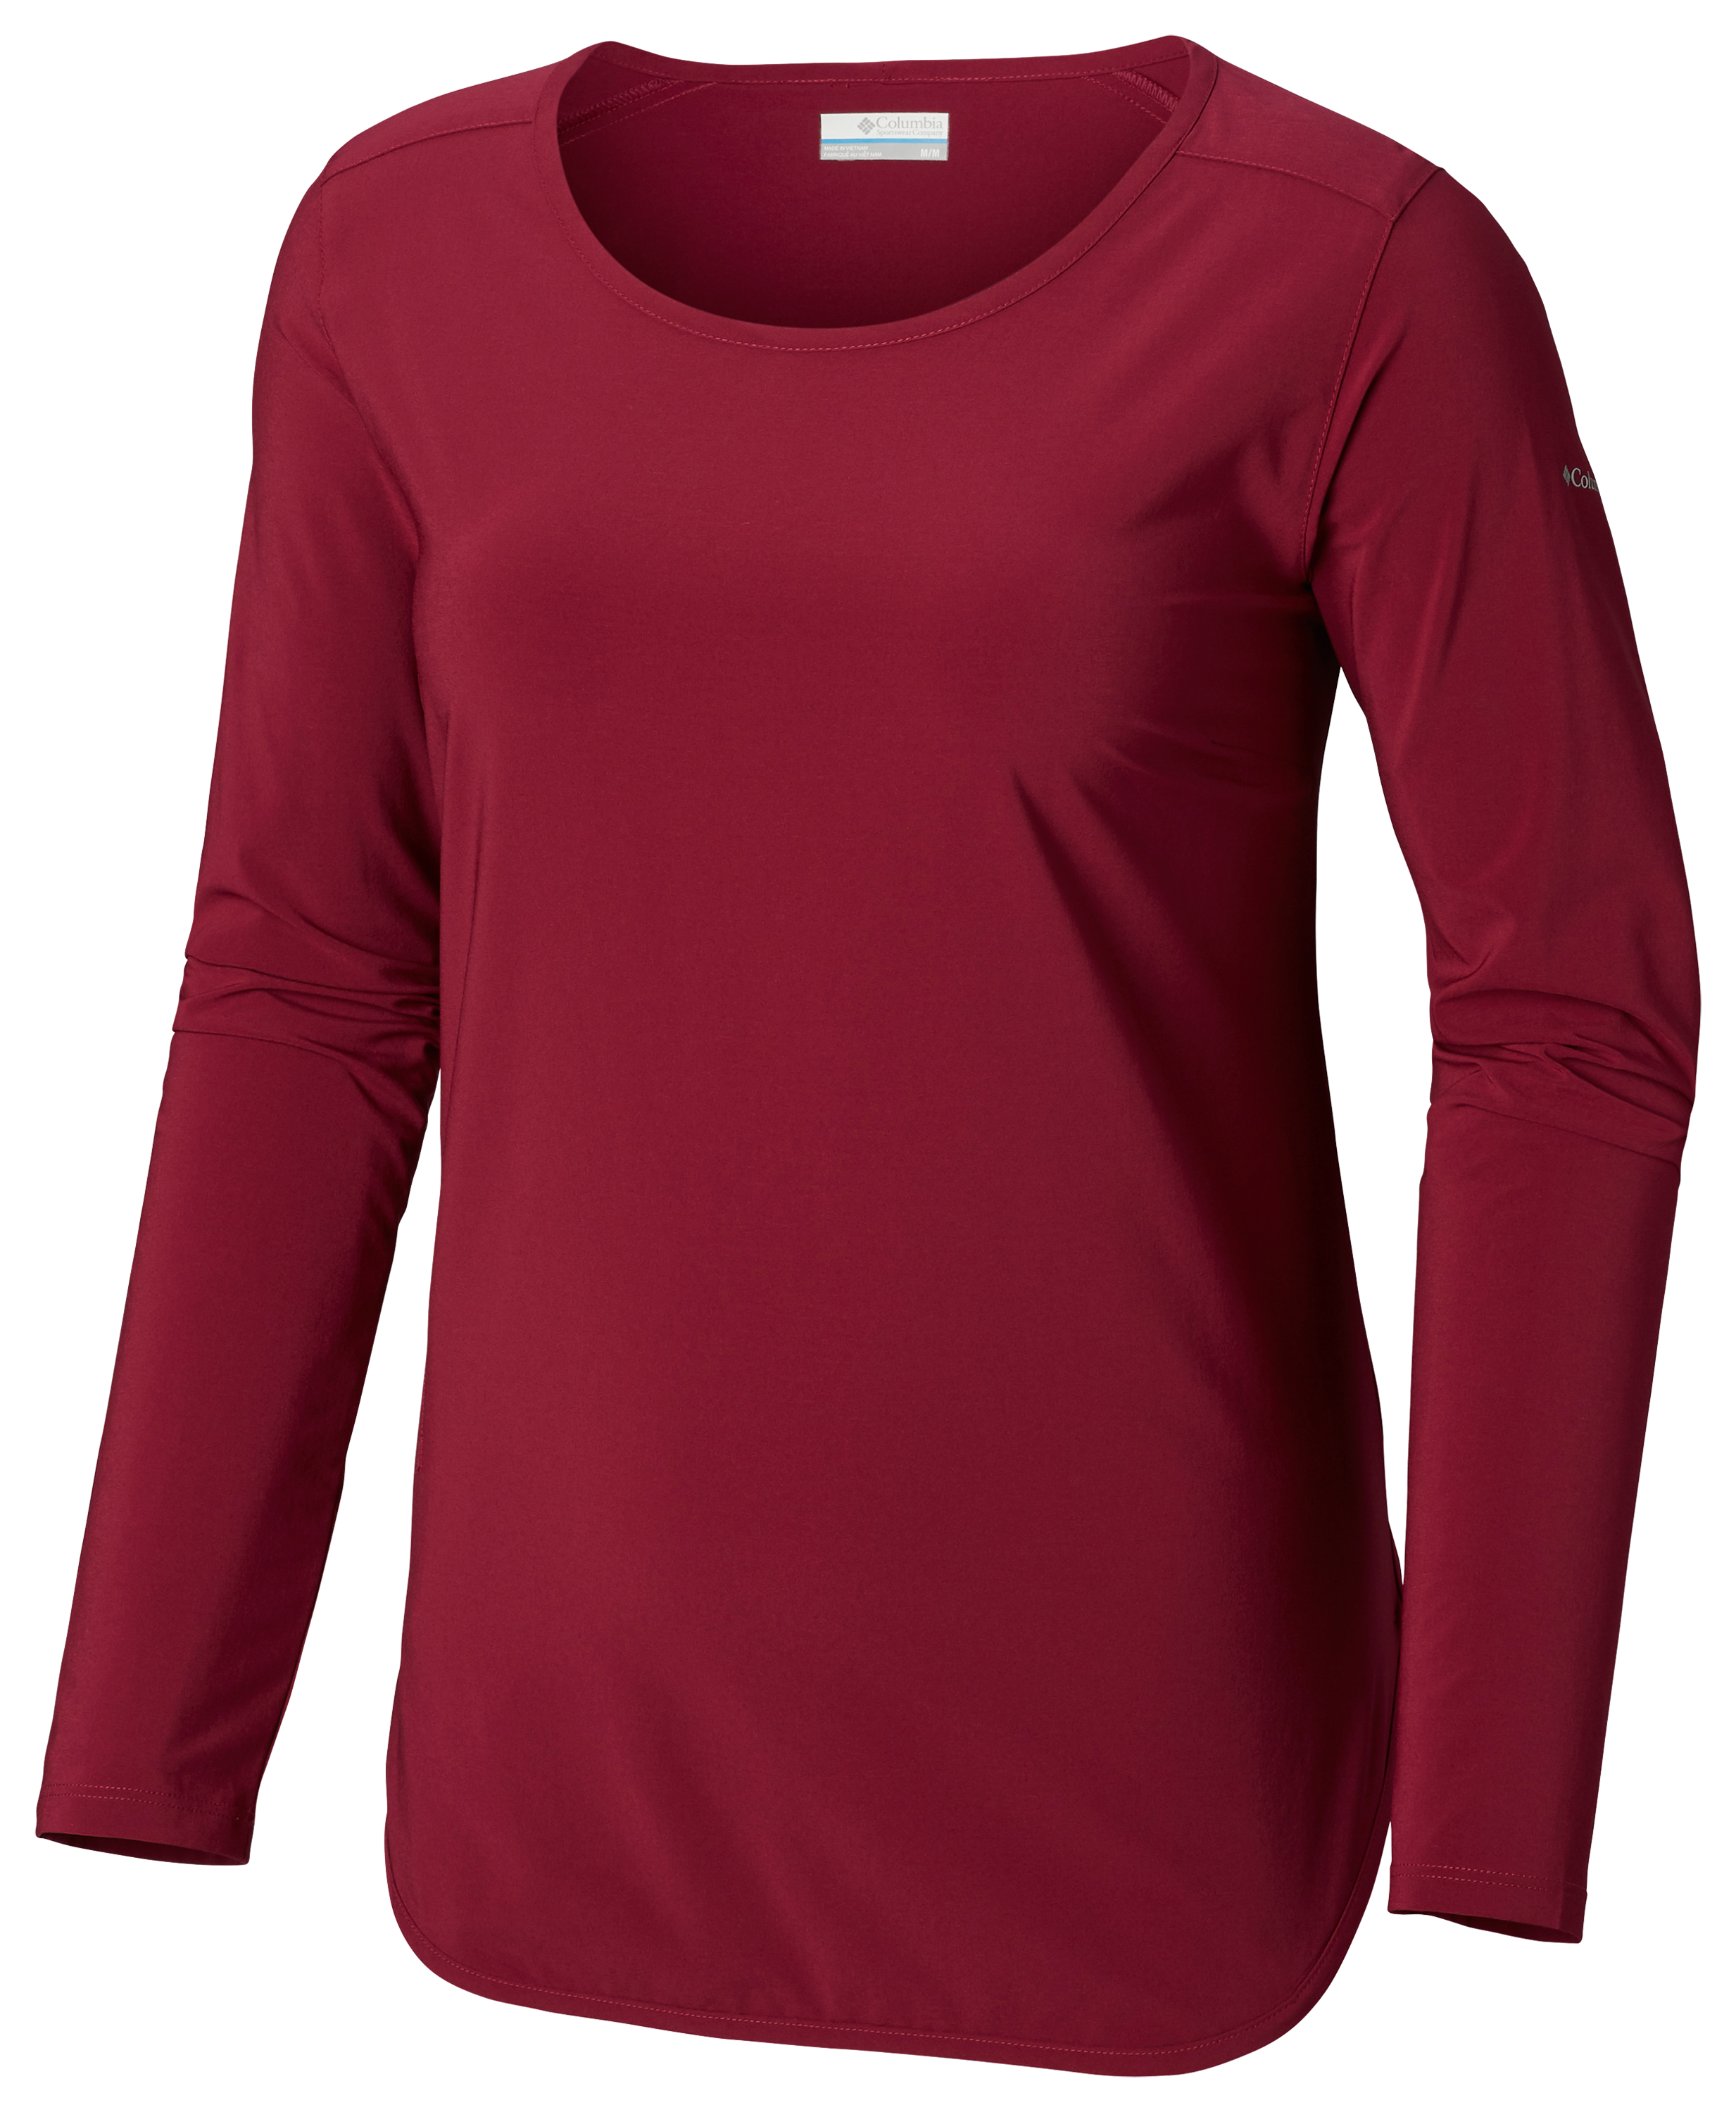 Columbia Place to Place Long-Sleeve Sun Shirt for Ladies